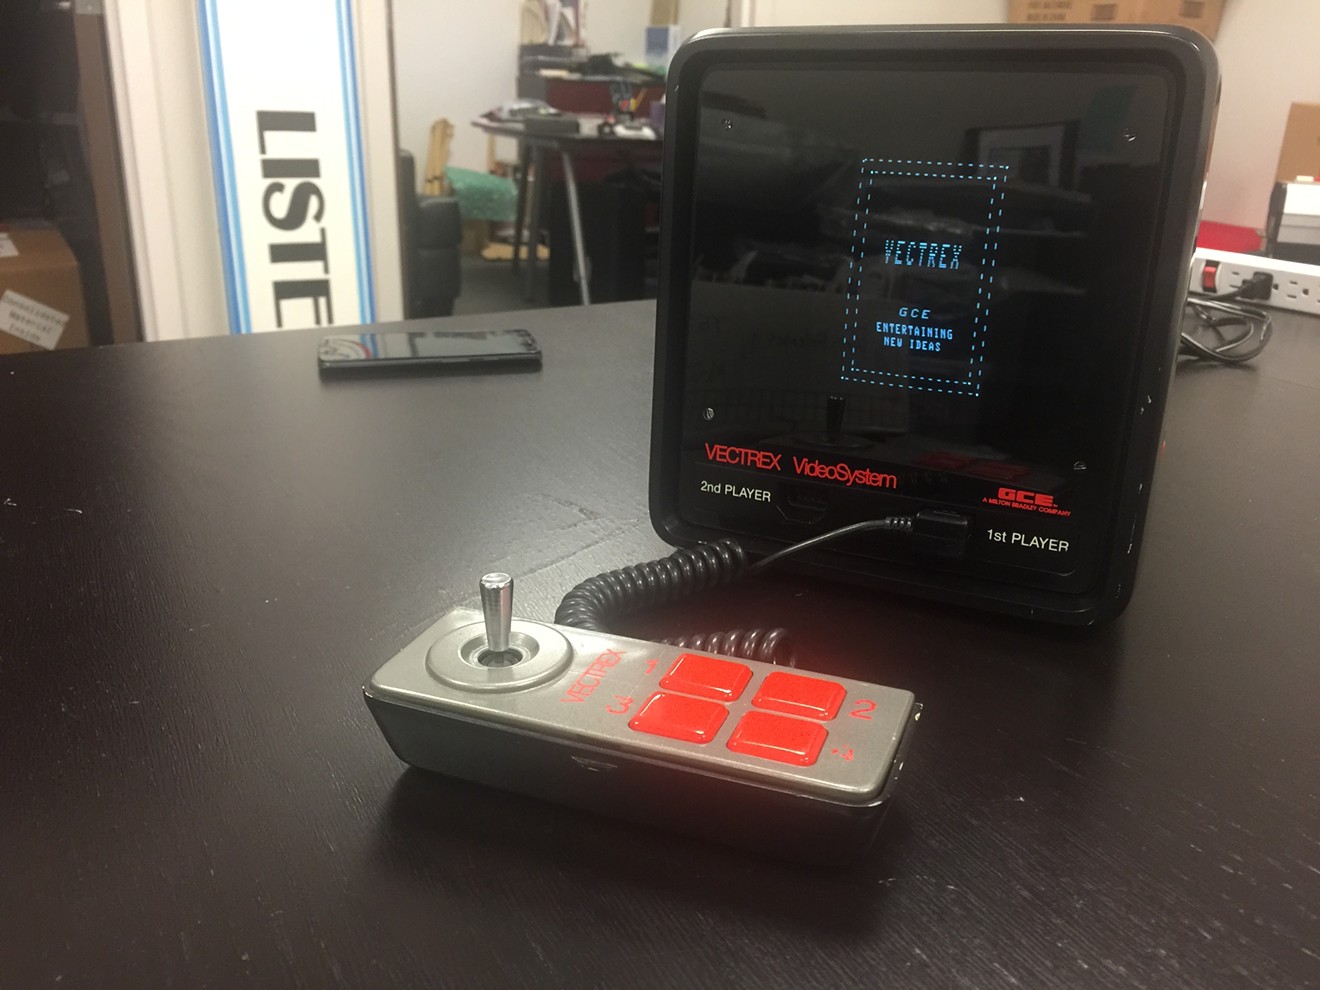 The Mini-Vectrex is one of the first portable video game consoles developed in the 1980s that never went on sale. In November, the National Video Game Museum in Frisco found and refurbished one of these rare prototypes.